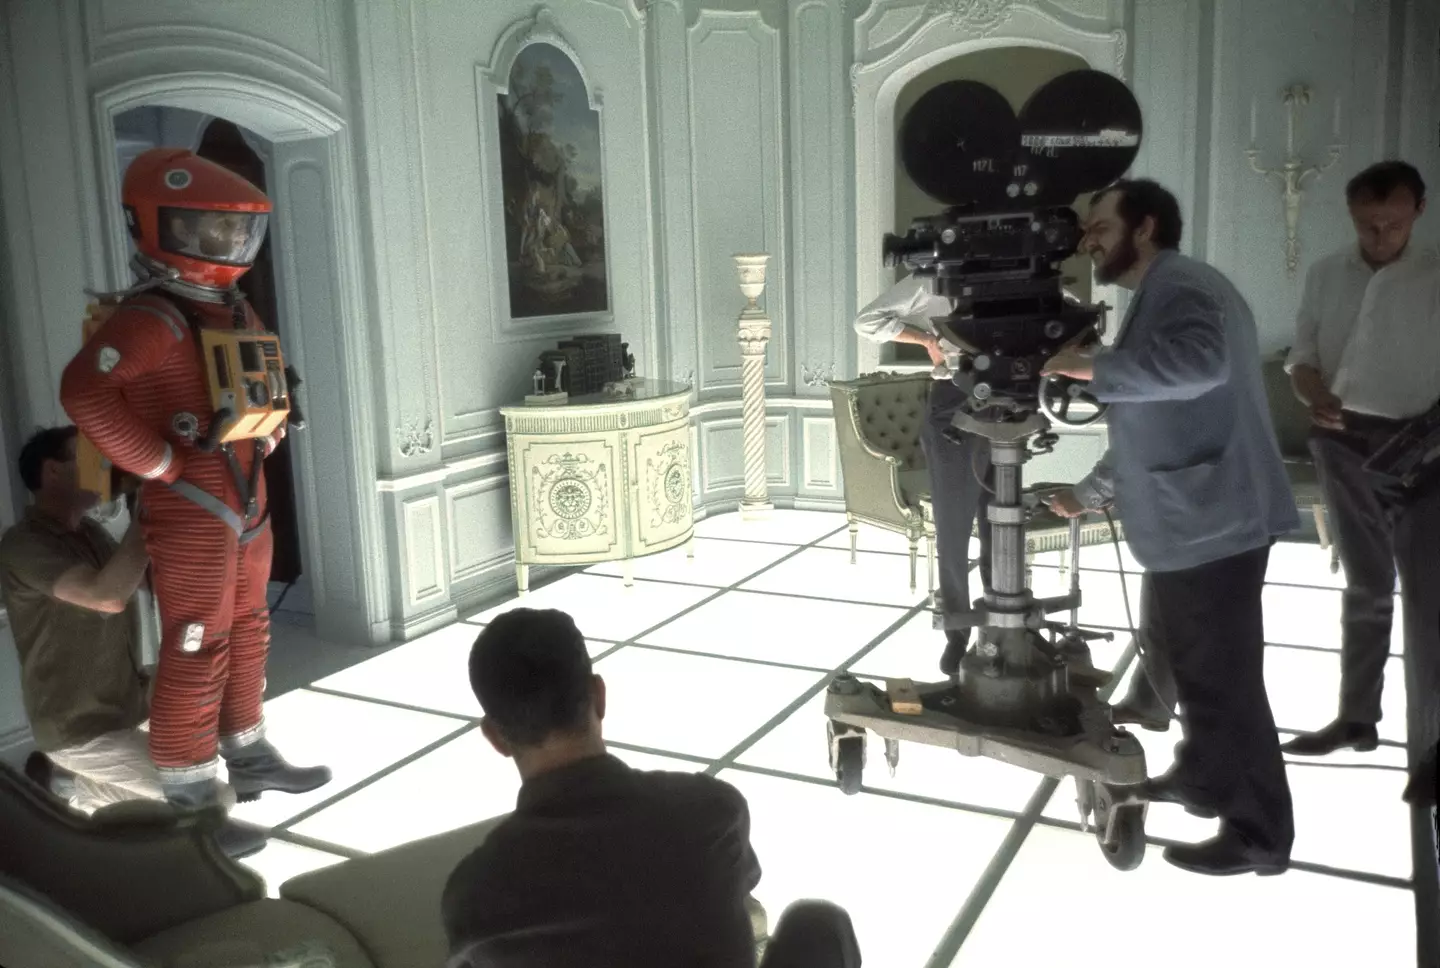 Stanley Kubrick behind the scenes of 2001: A Space Odyssey.